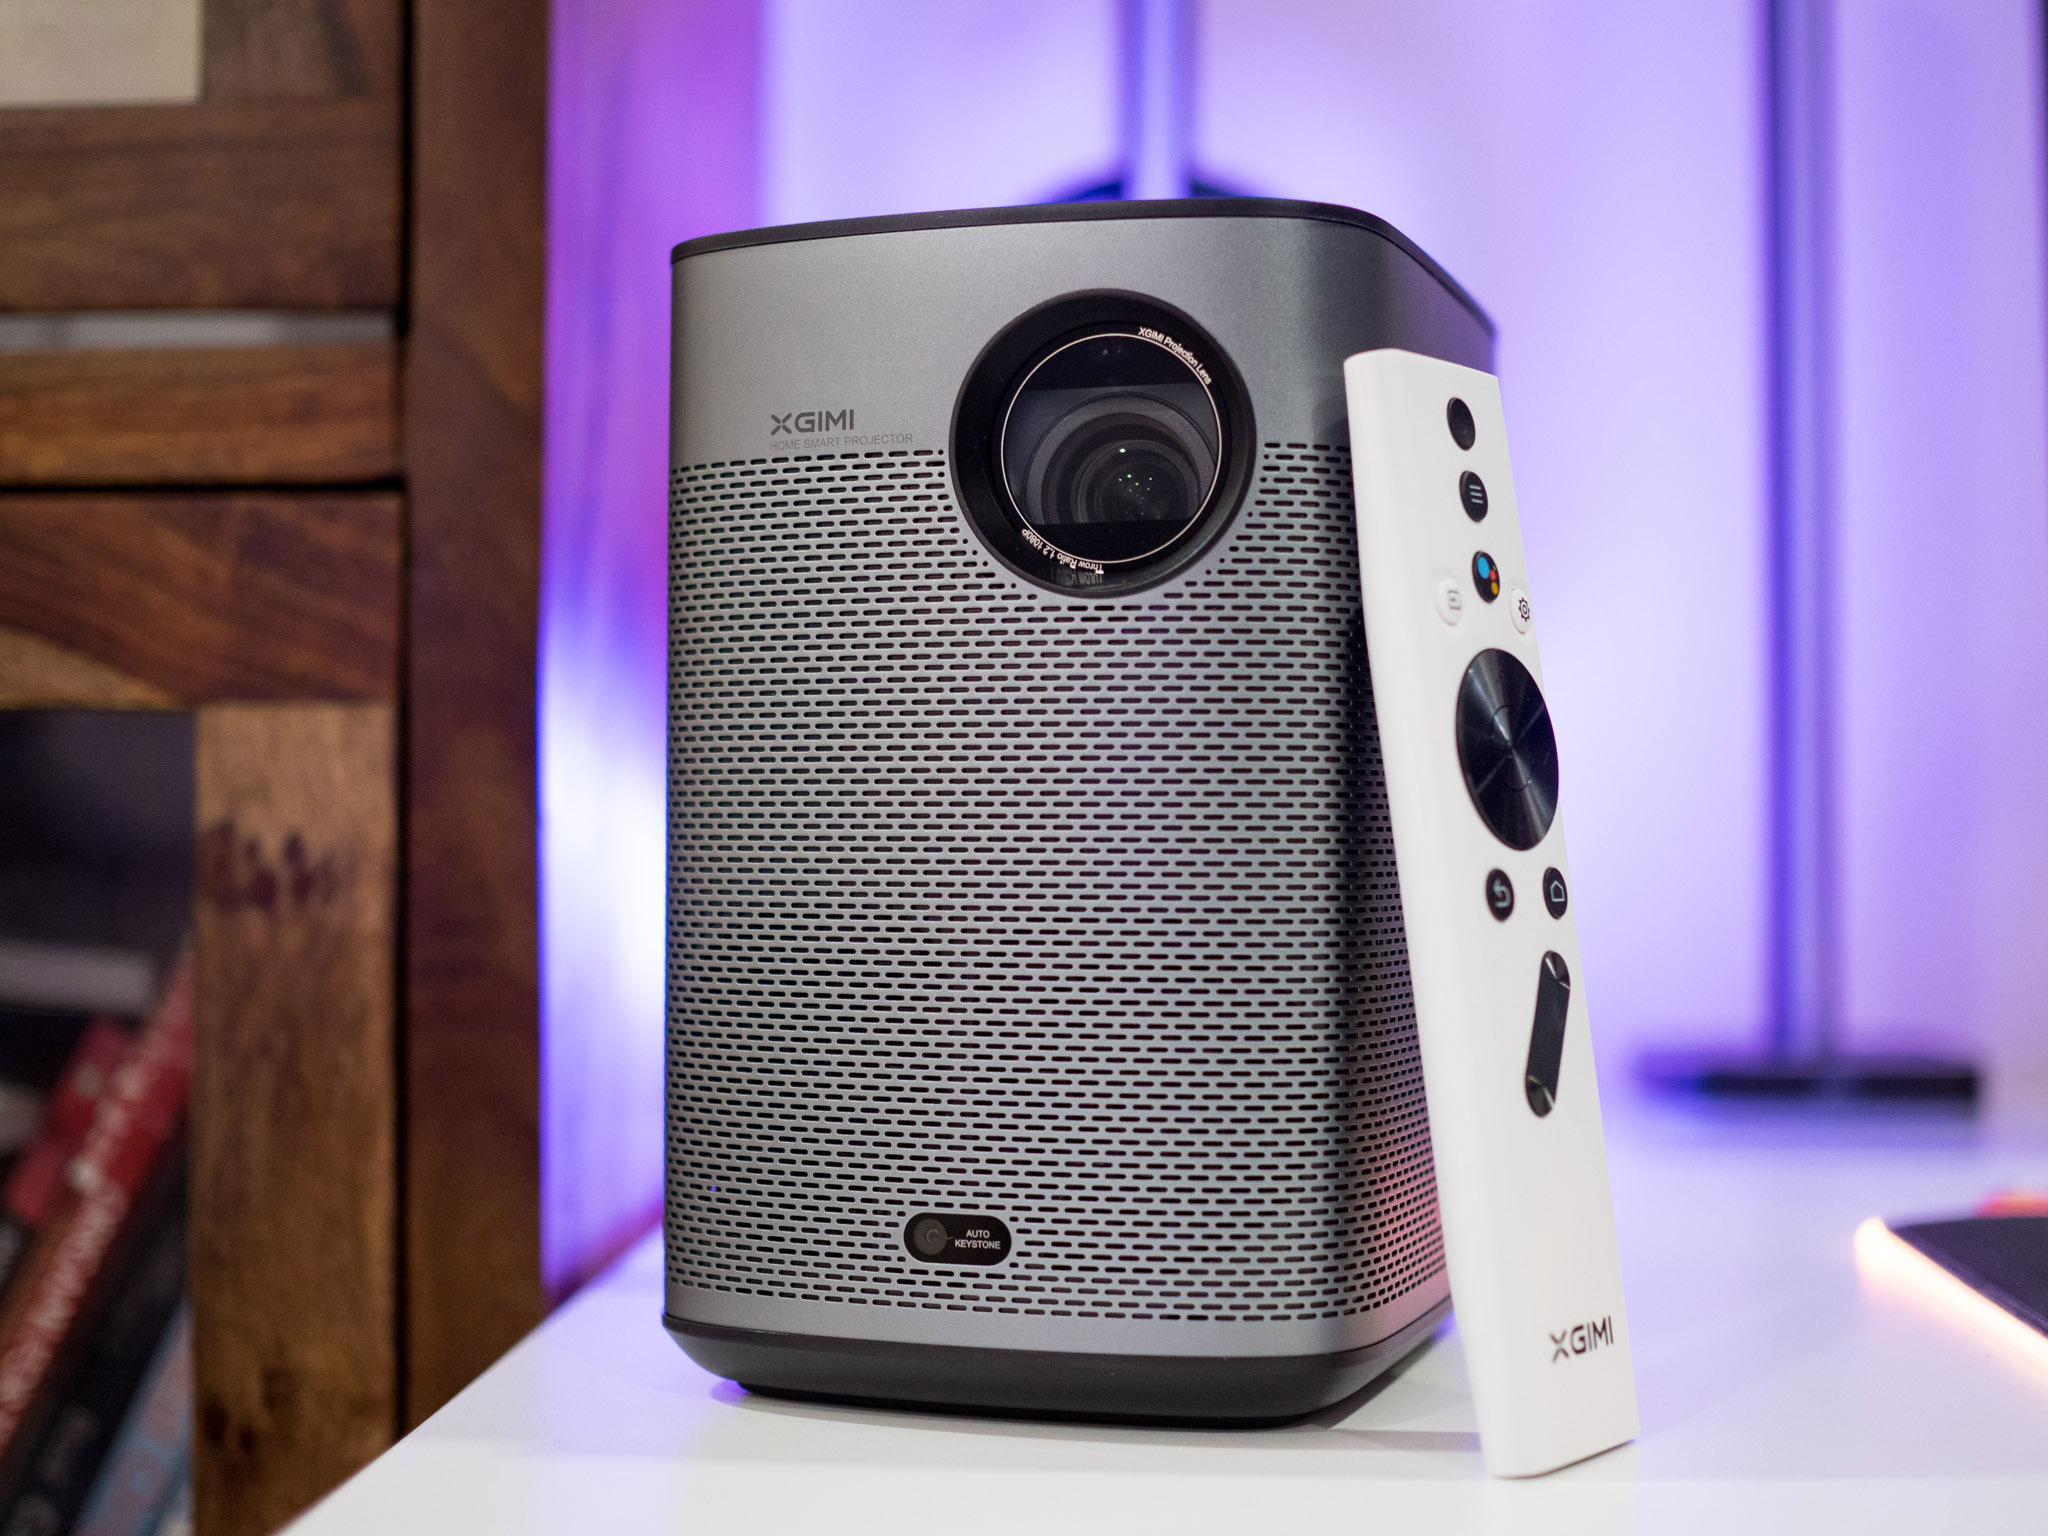 XGIMI Halo+ review: The best portable projector you can buy right